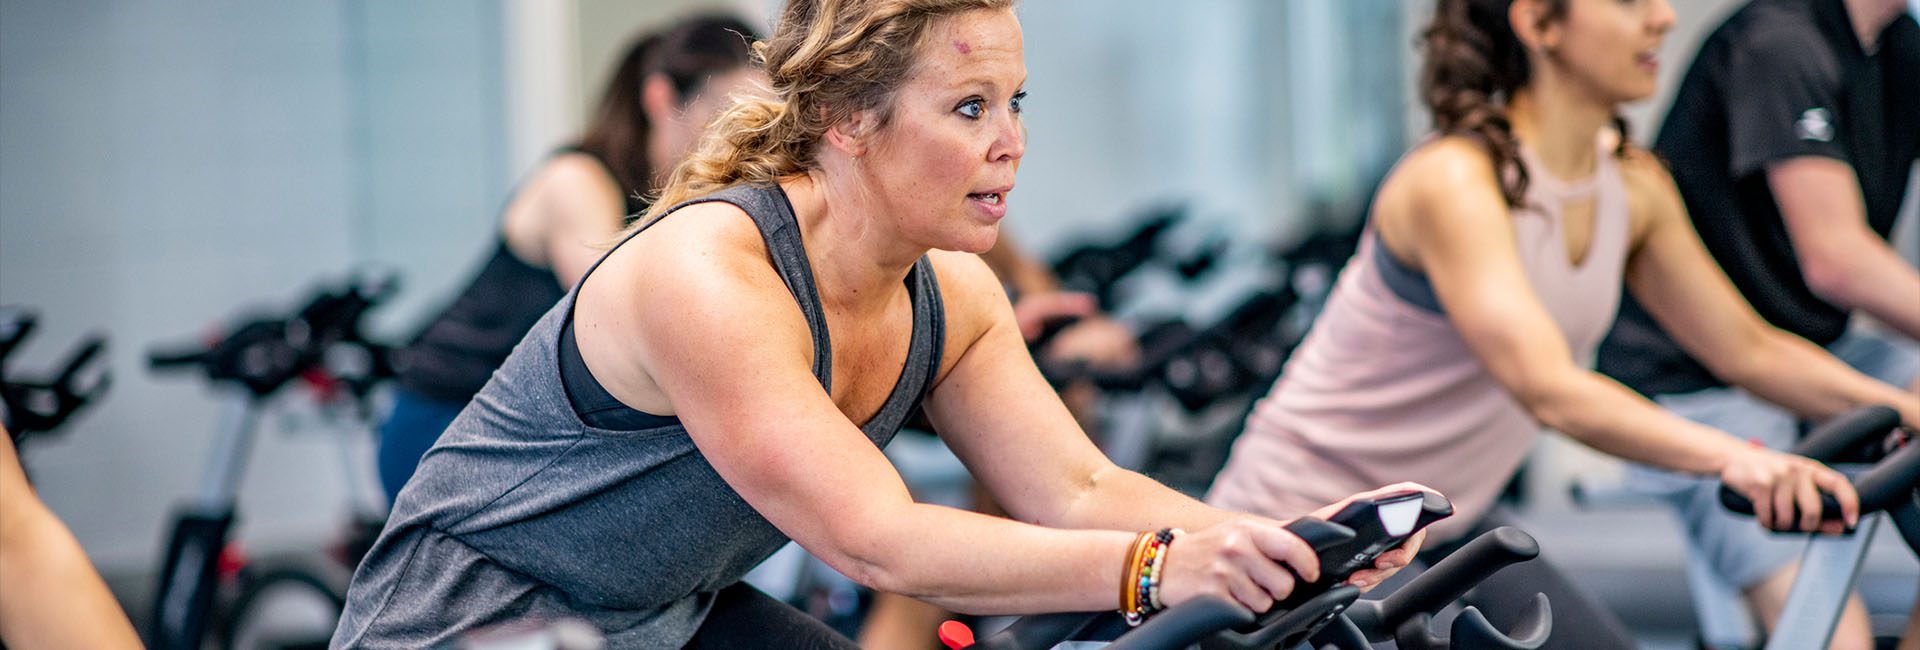 woman on a spin bike in gym fitness bike